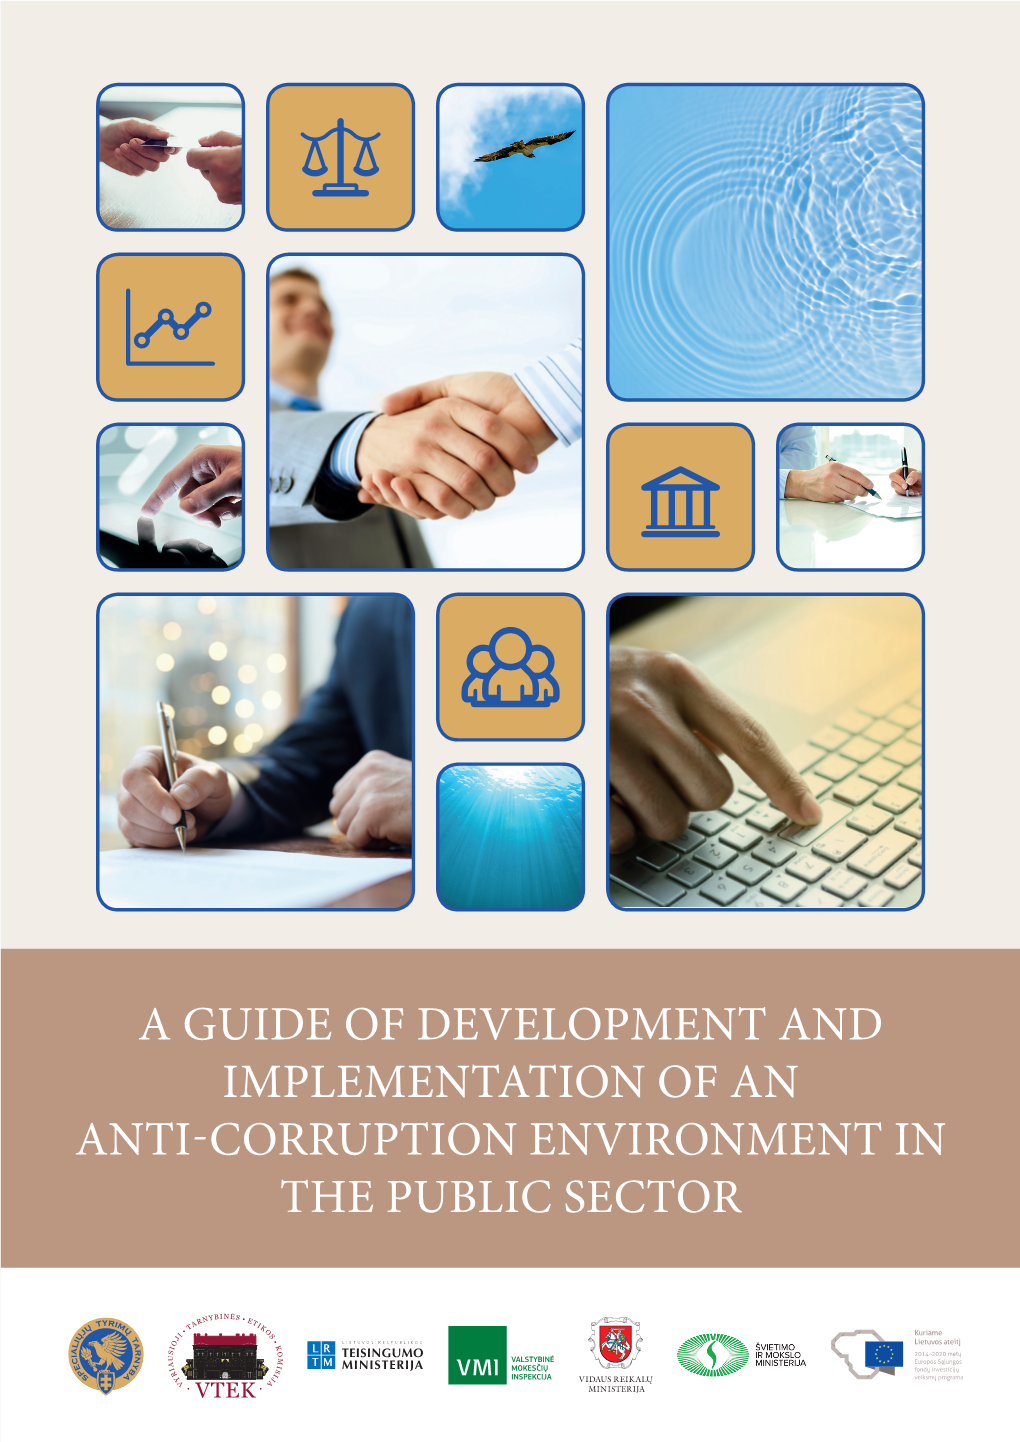 A Guide of Development and Implementation of an Anti-Corruption Environment in the Public Sector